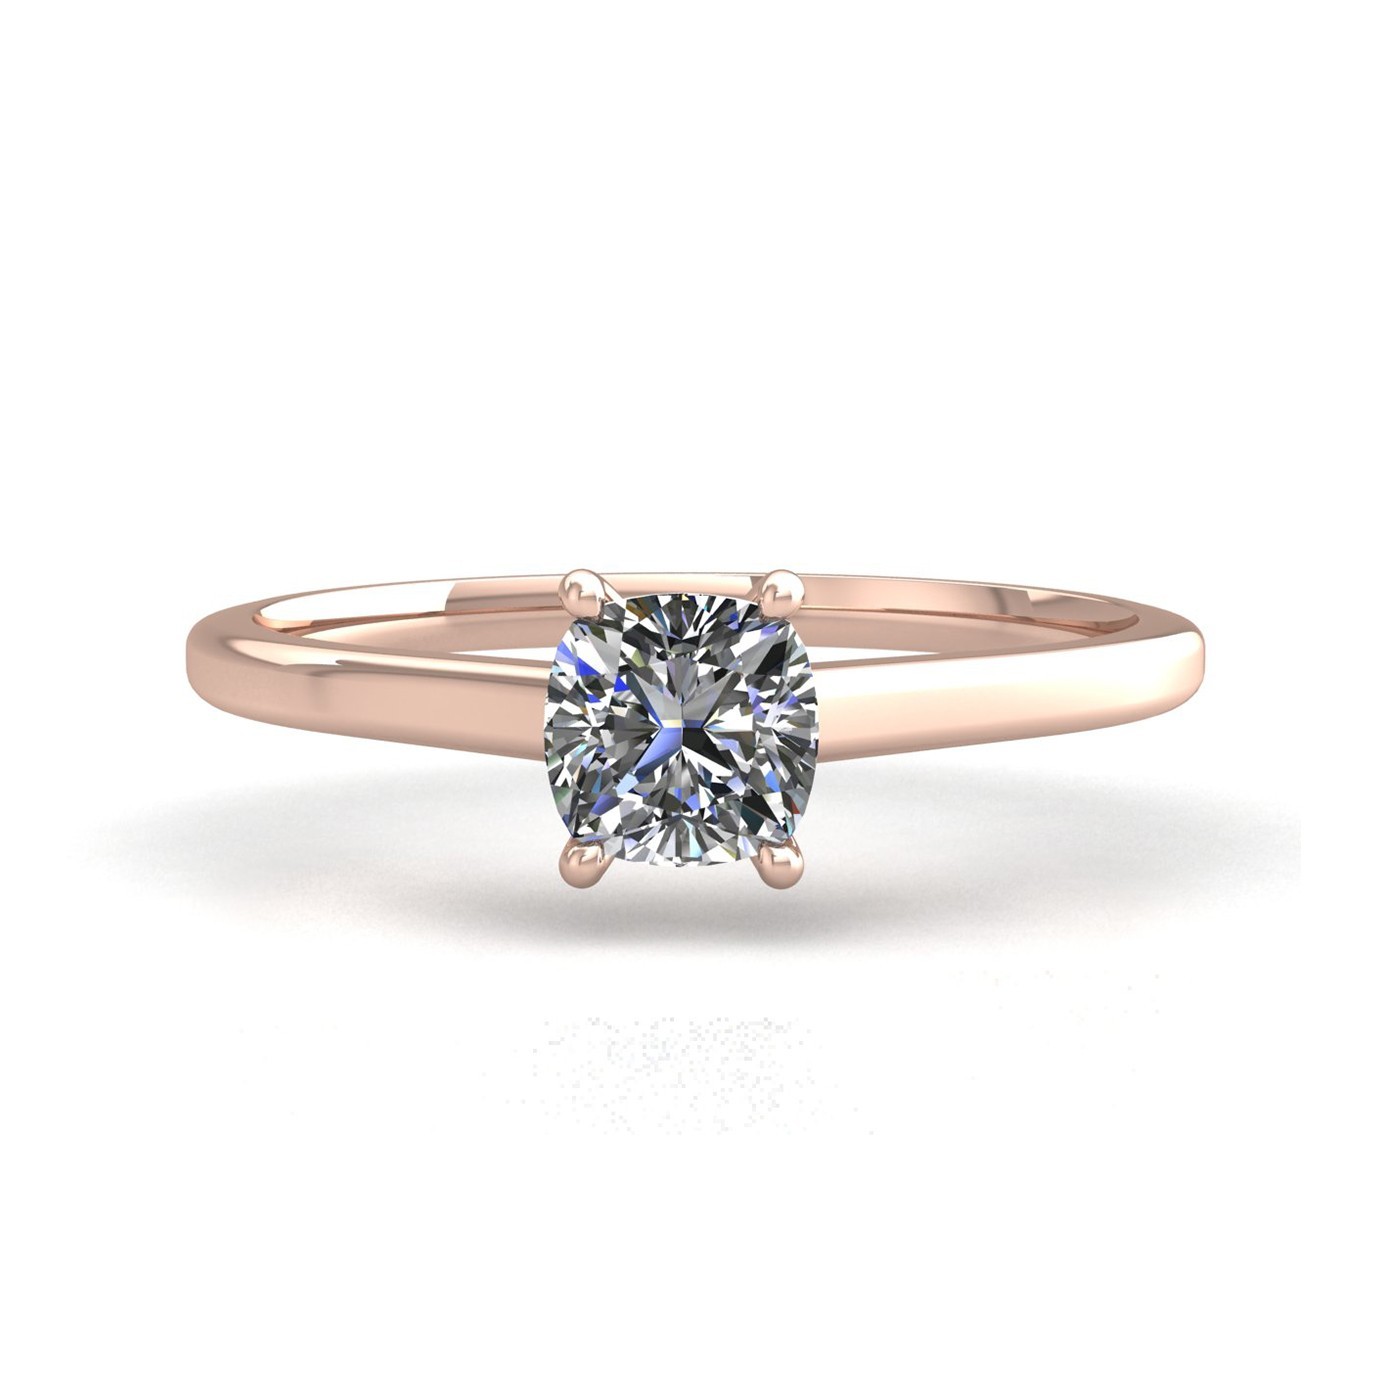 18k rose gold 1.0ct 4 prongs solitaire cushion cut diamond engagement ring with whisper thin band Photos & images